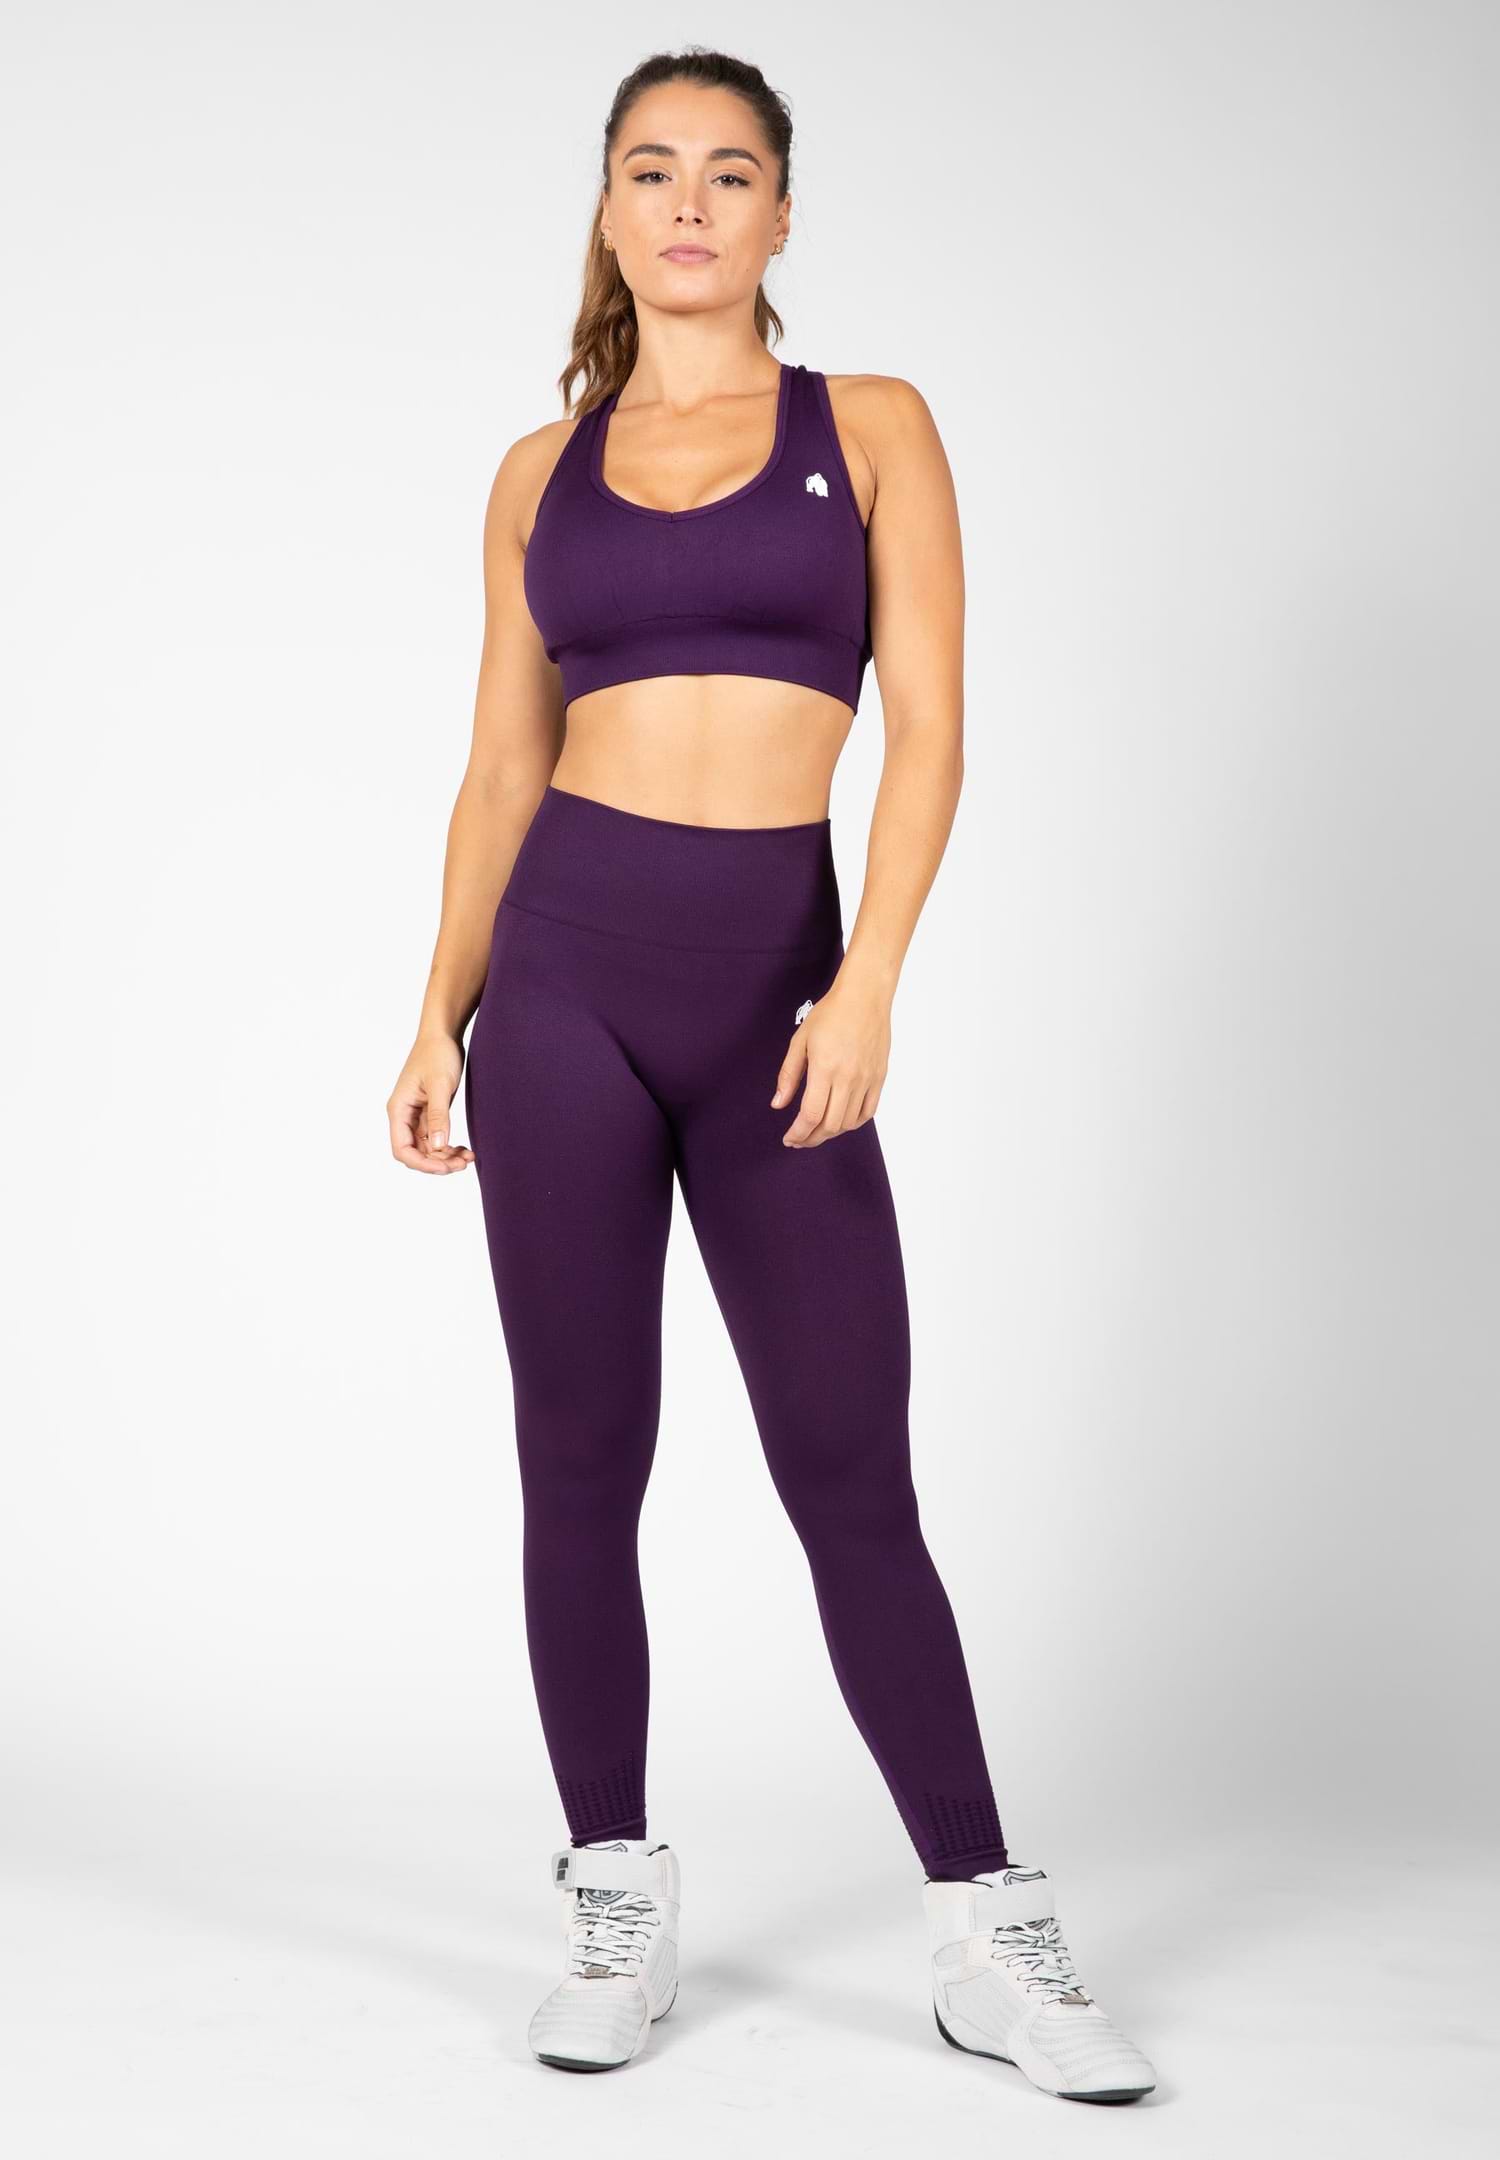 Love & Other Things gym seamless leggings in purple